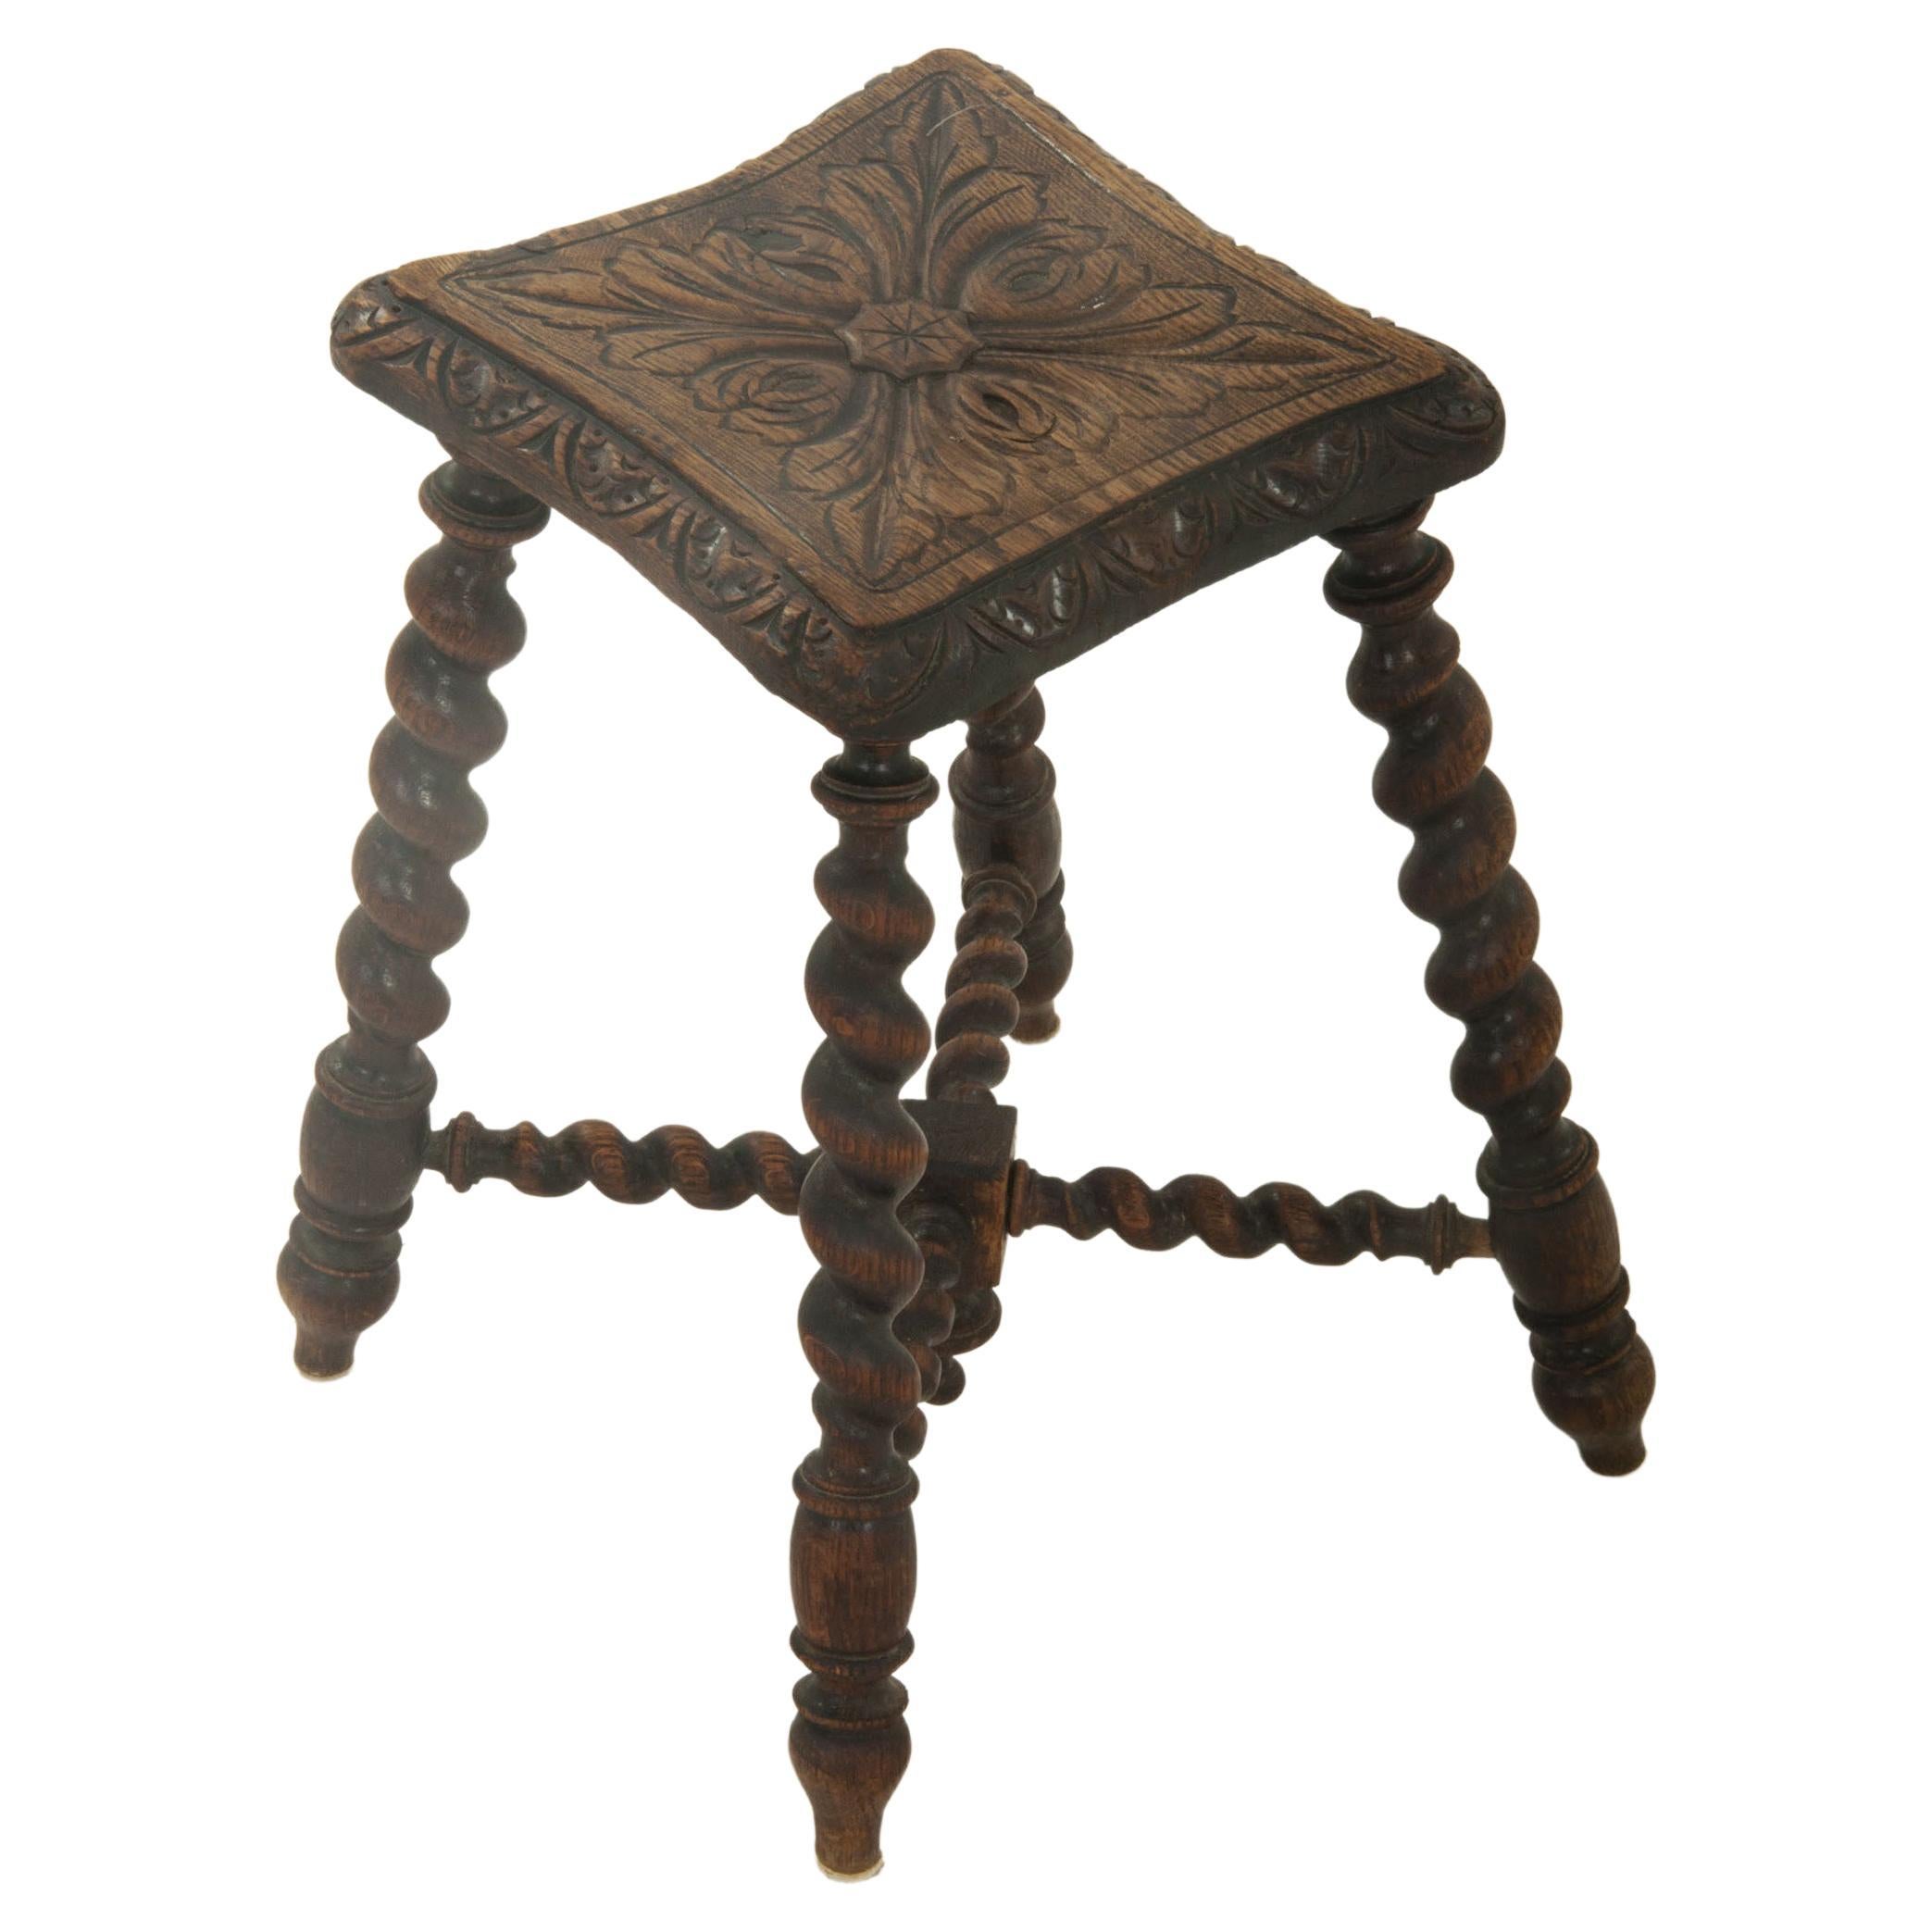 English Stool, Twisted Legs, 19th Century, Brown Color